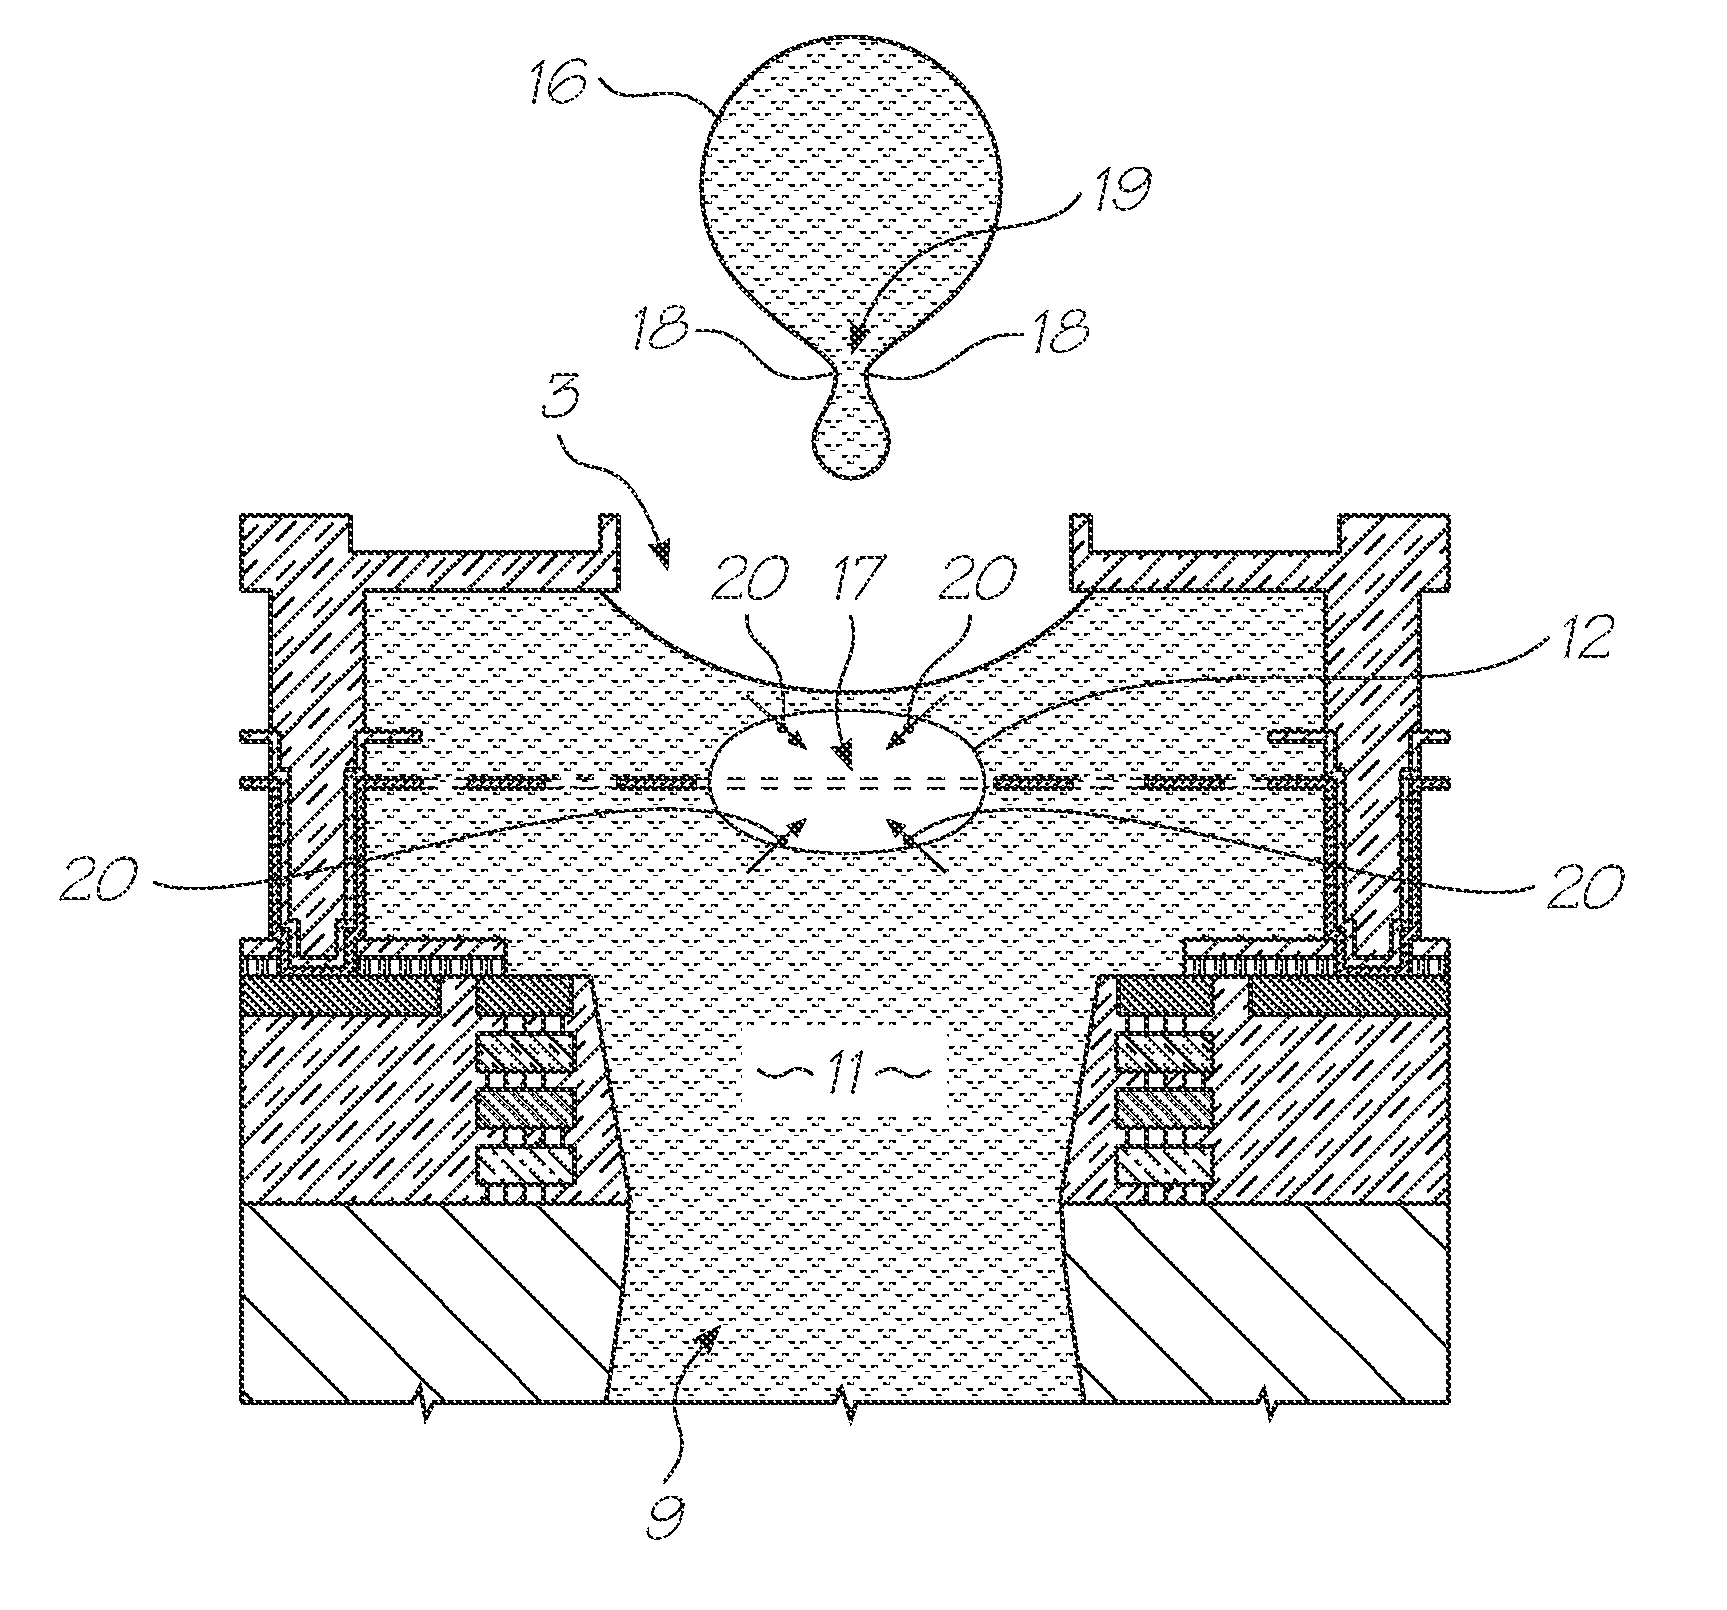 Printhead with increasing drive pulse to counter heater oxide growth